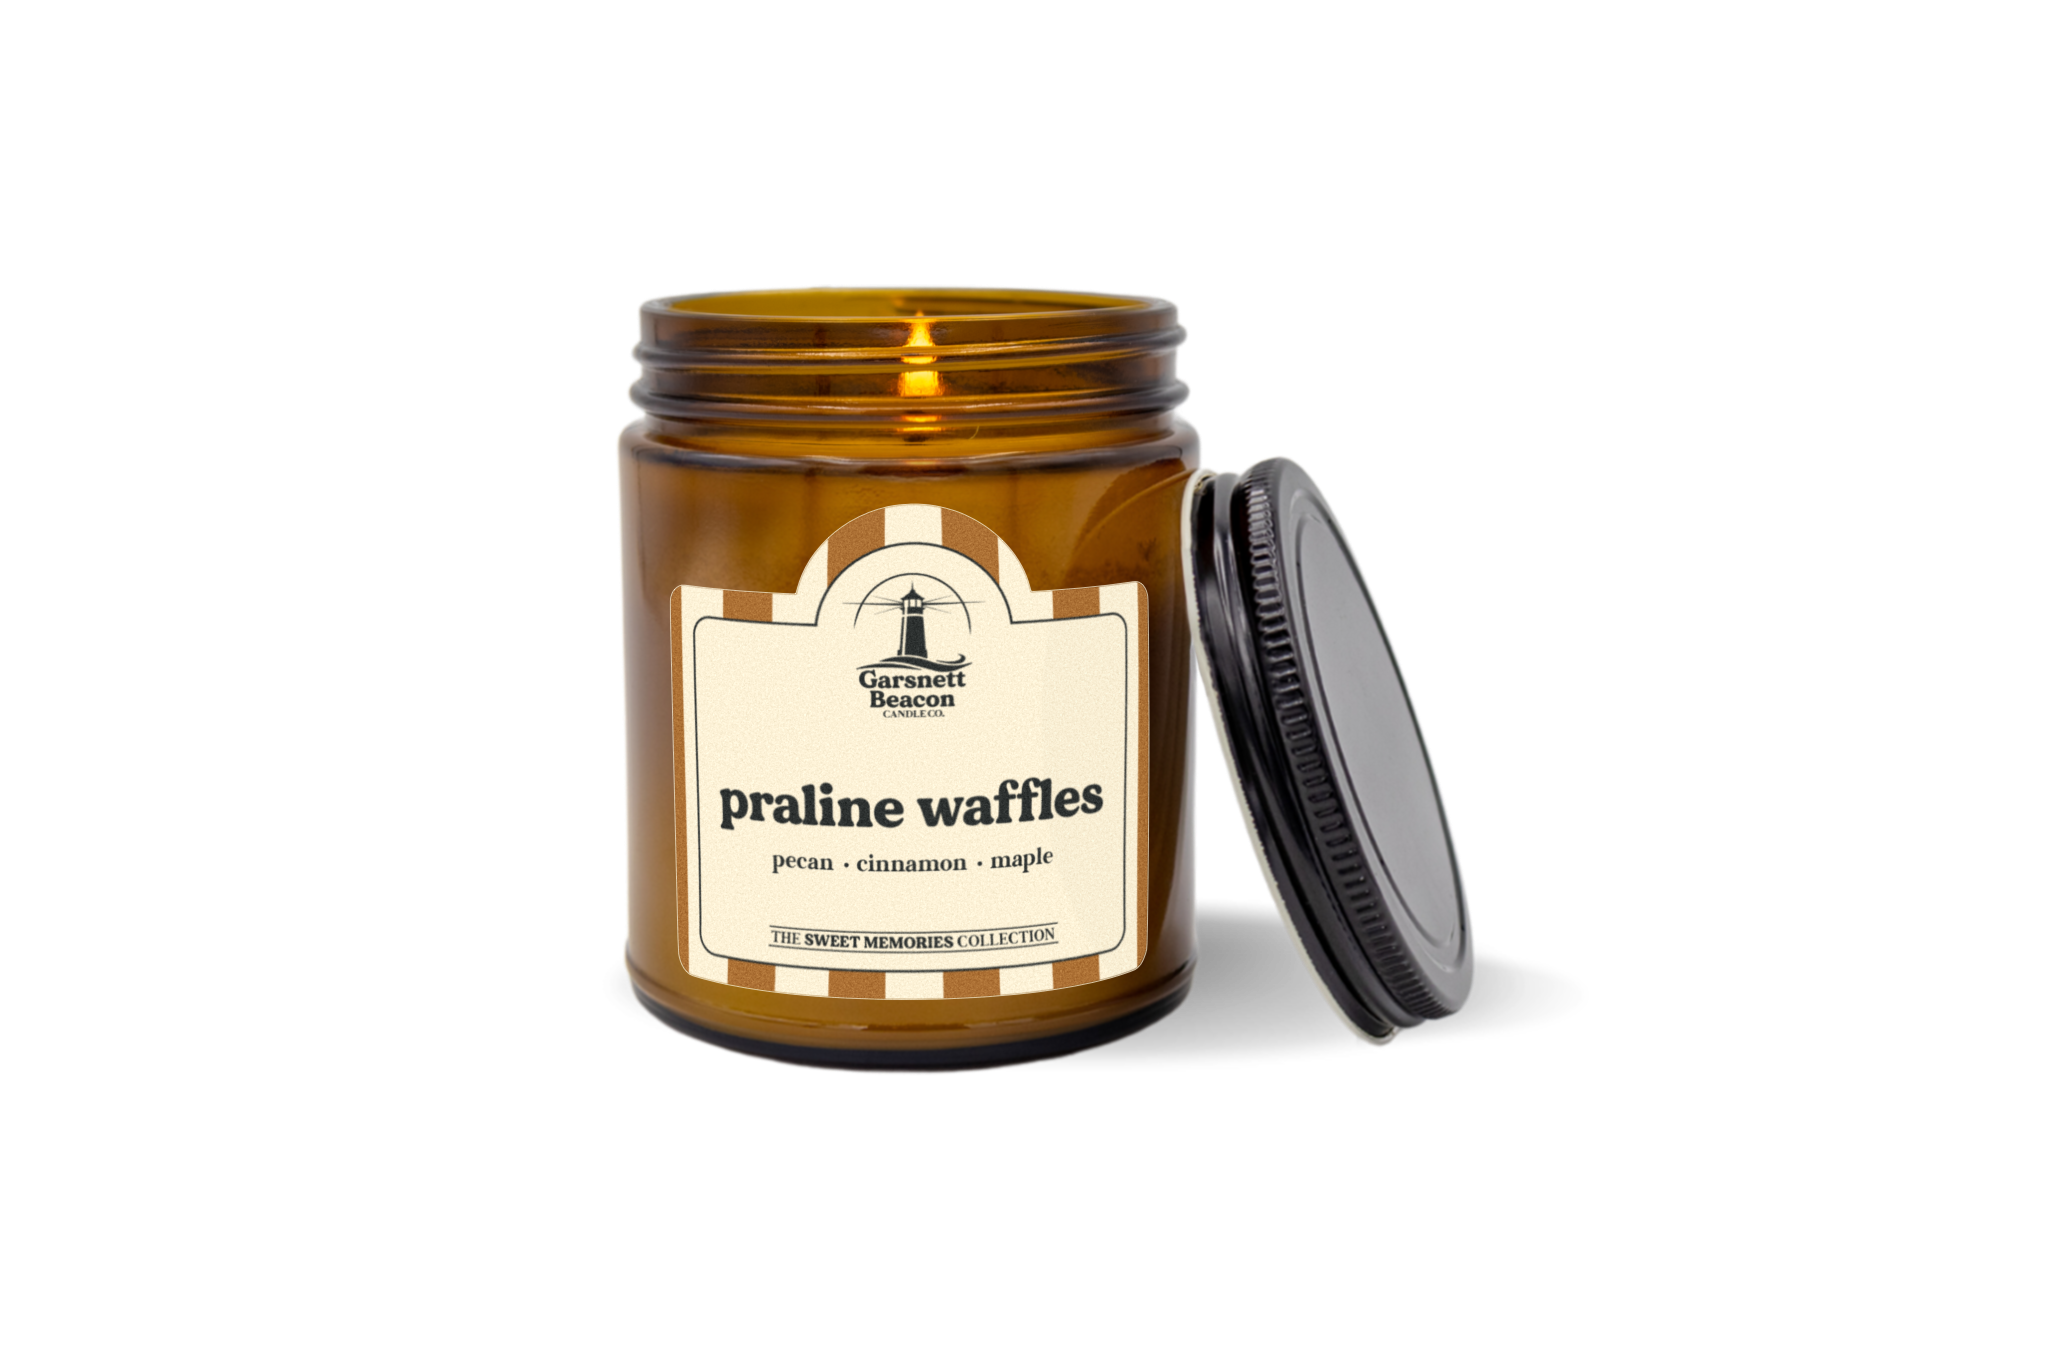 Praline Waffles Candle - Pecan, Cinnamon, Maple Syrup Scent